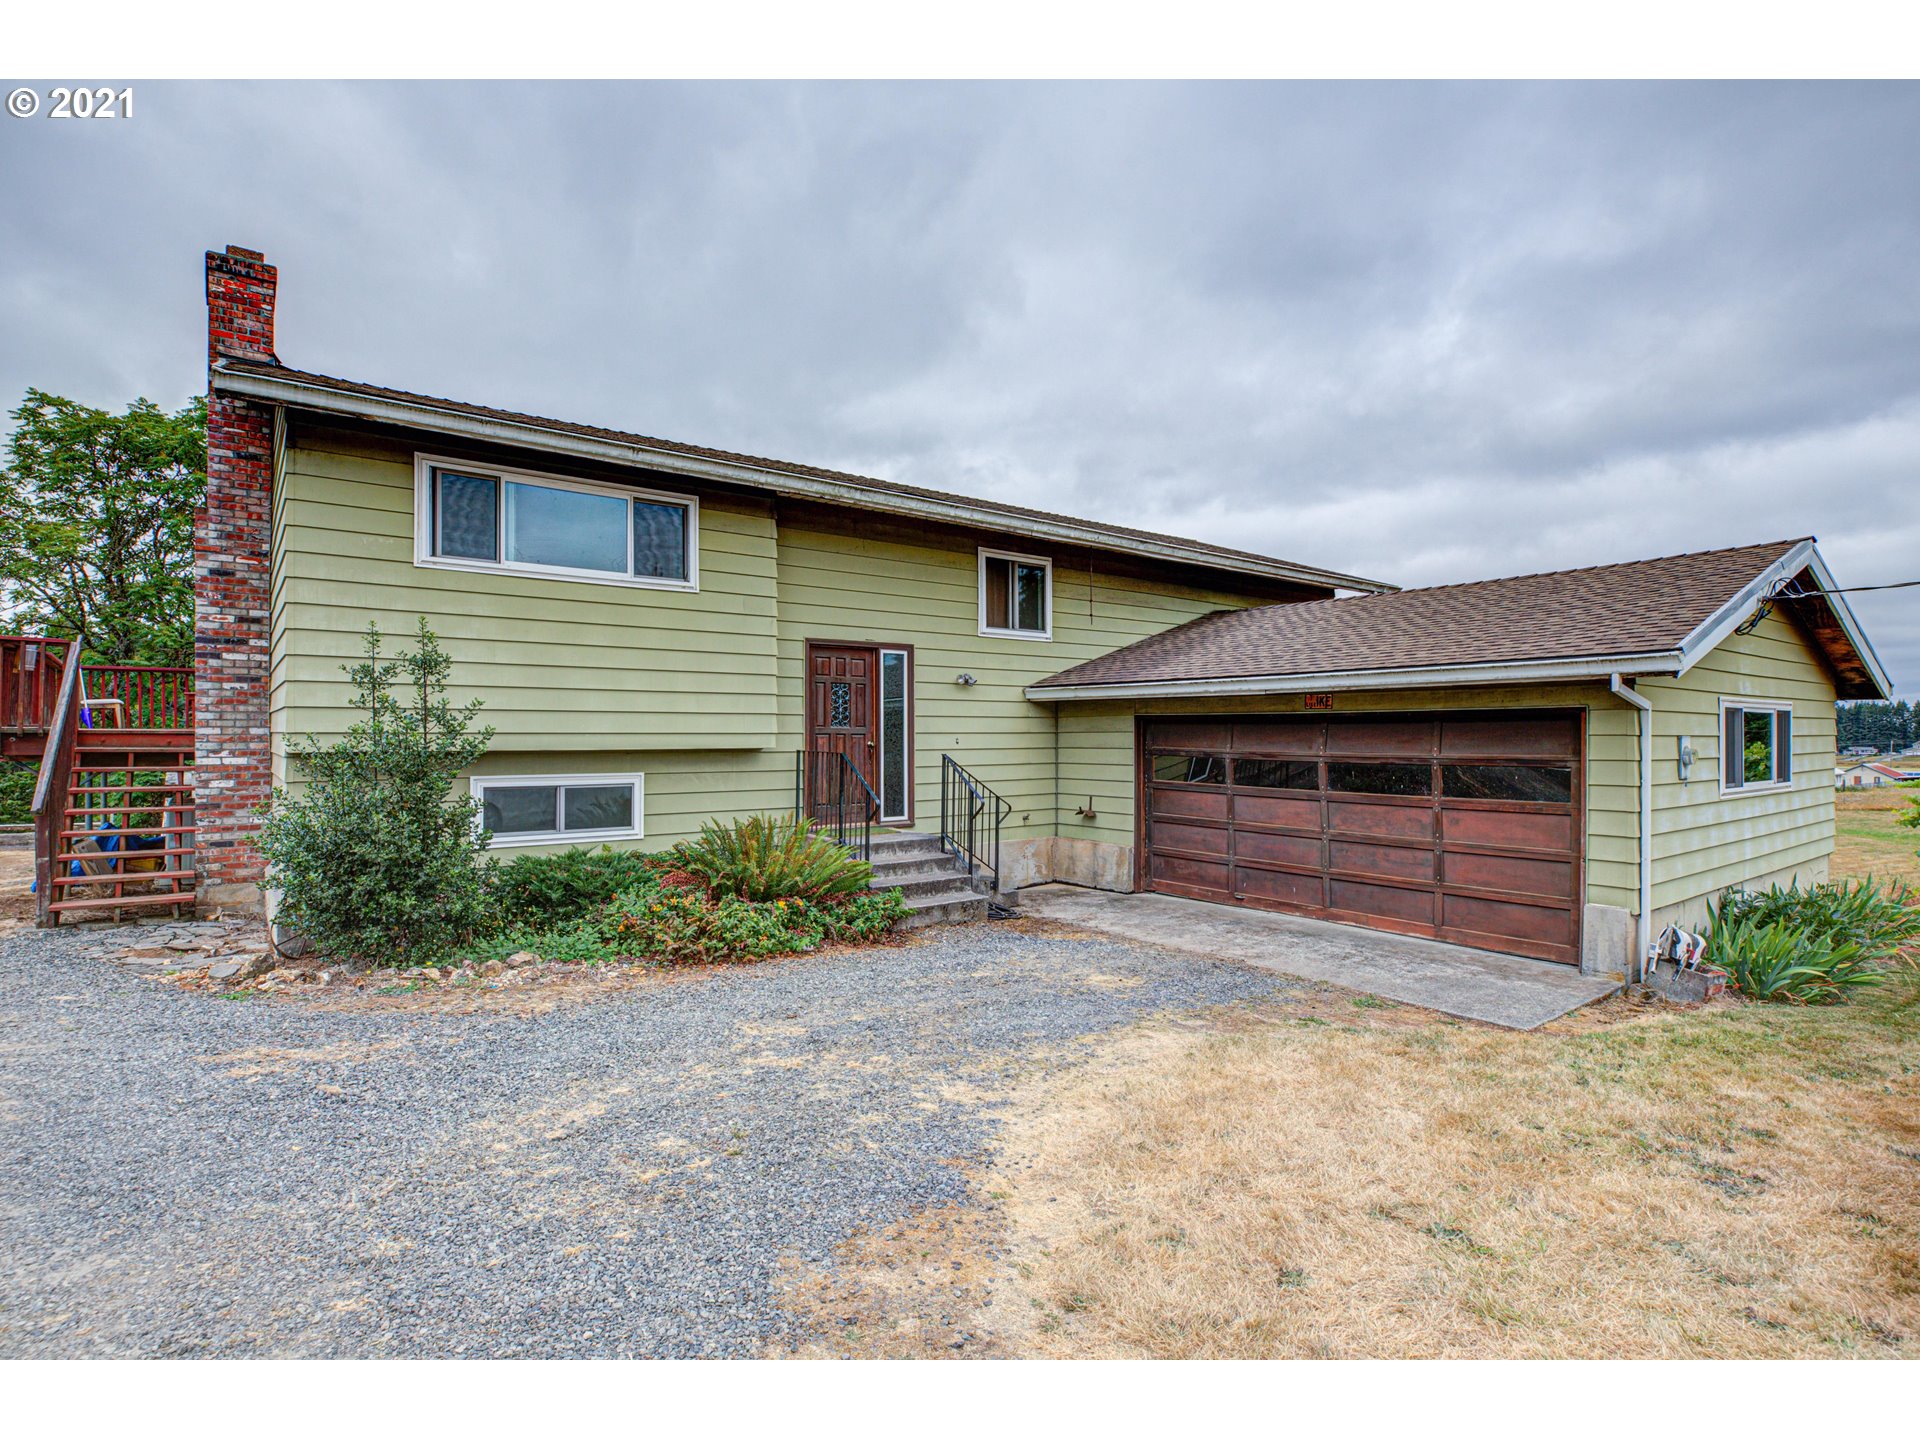 39170 SE TRUBEL RD (1 of 32)